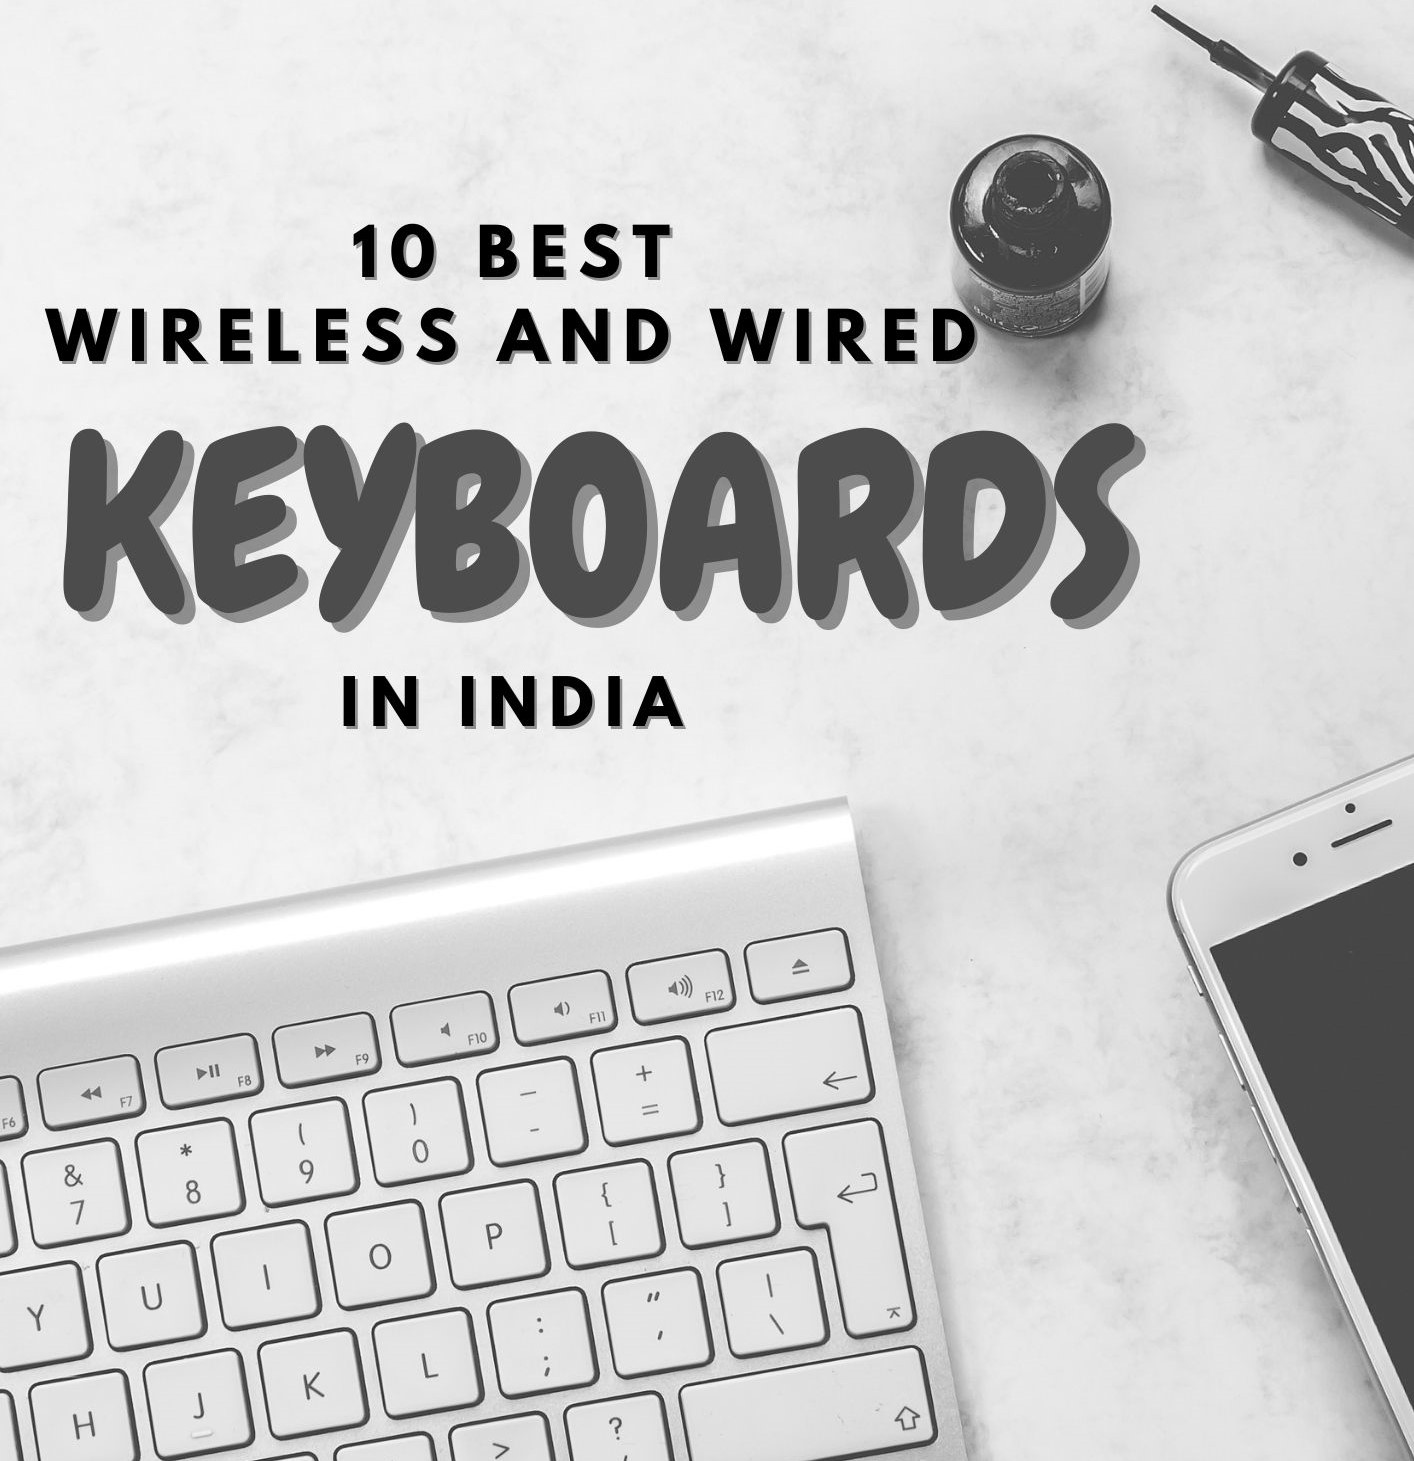 10 best wireless and wired keyboards in india